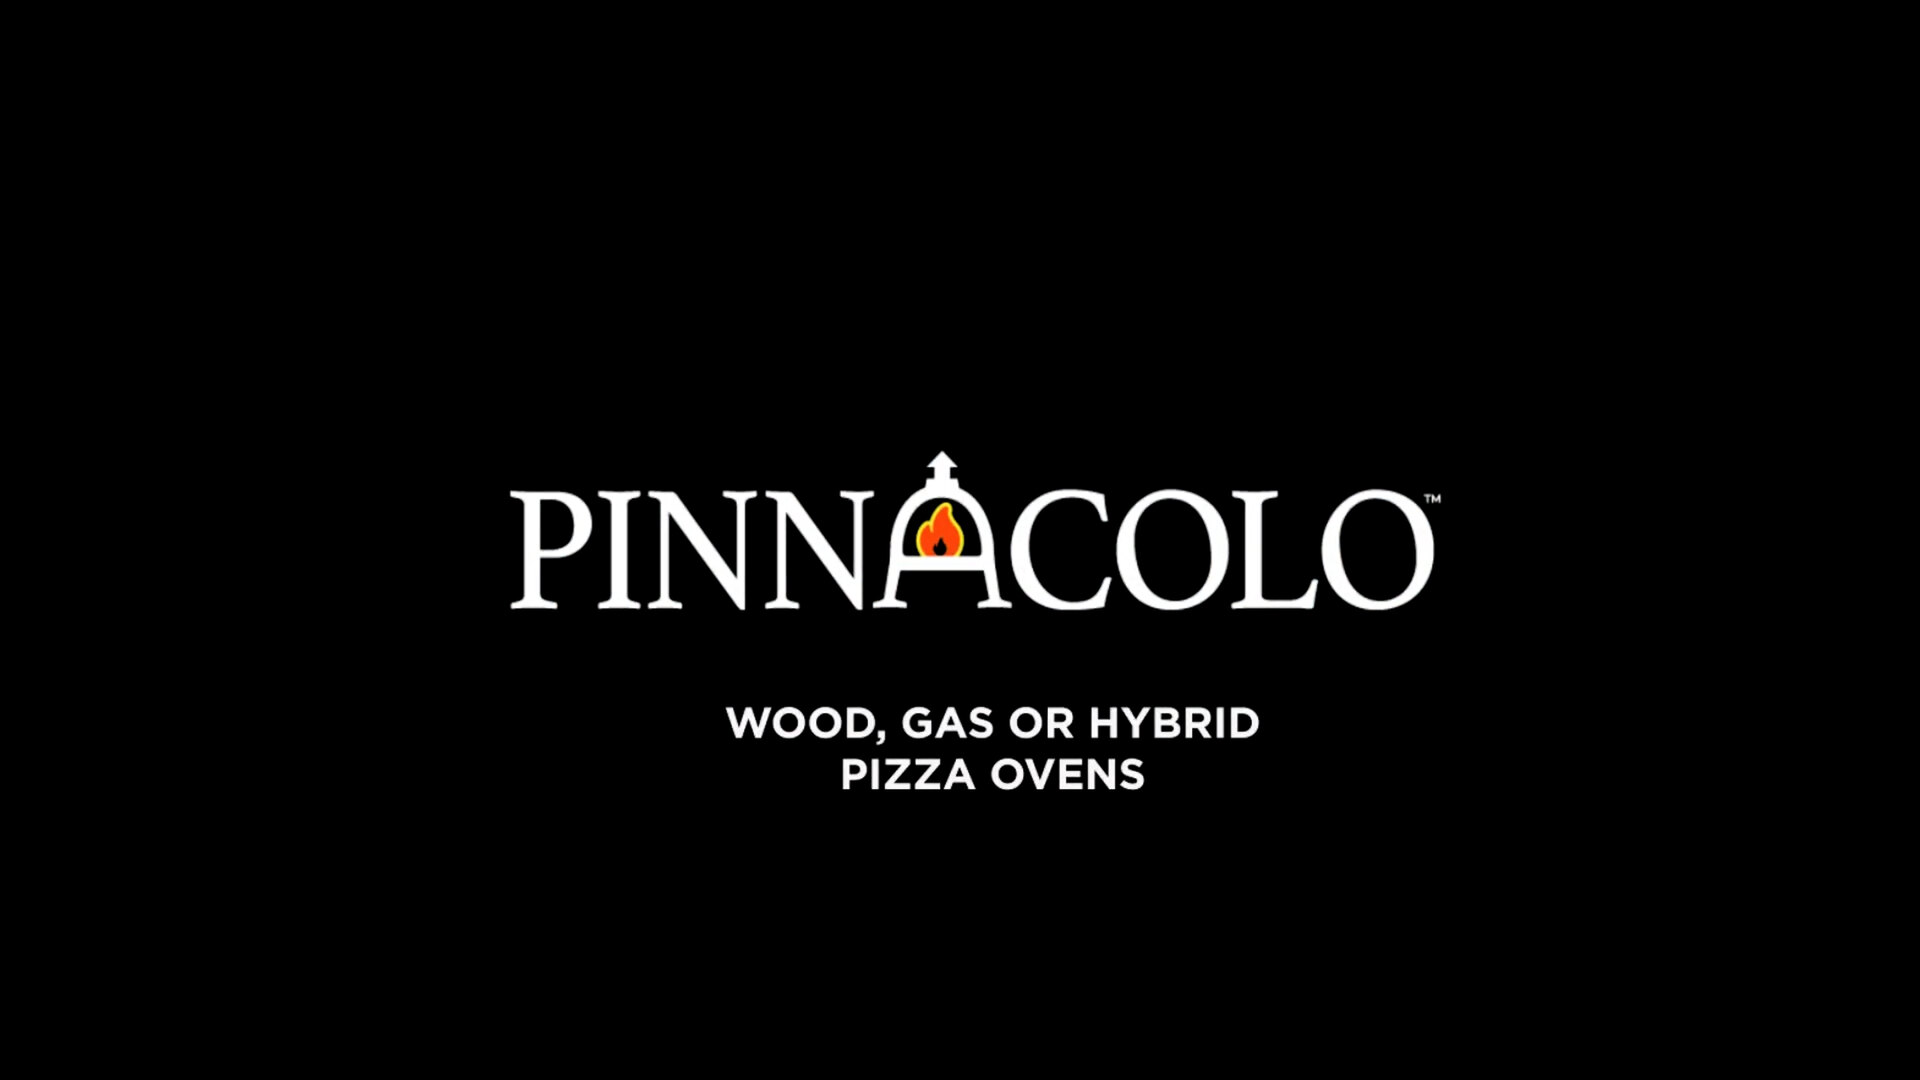 PINNACOLO Premio Wood Fired Pizza Oven with Accessories